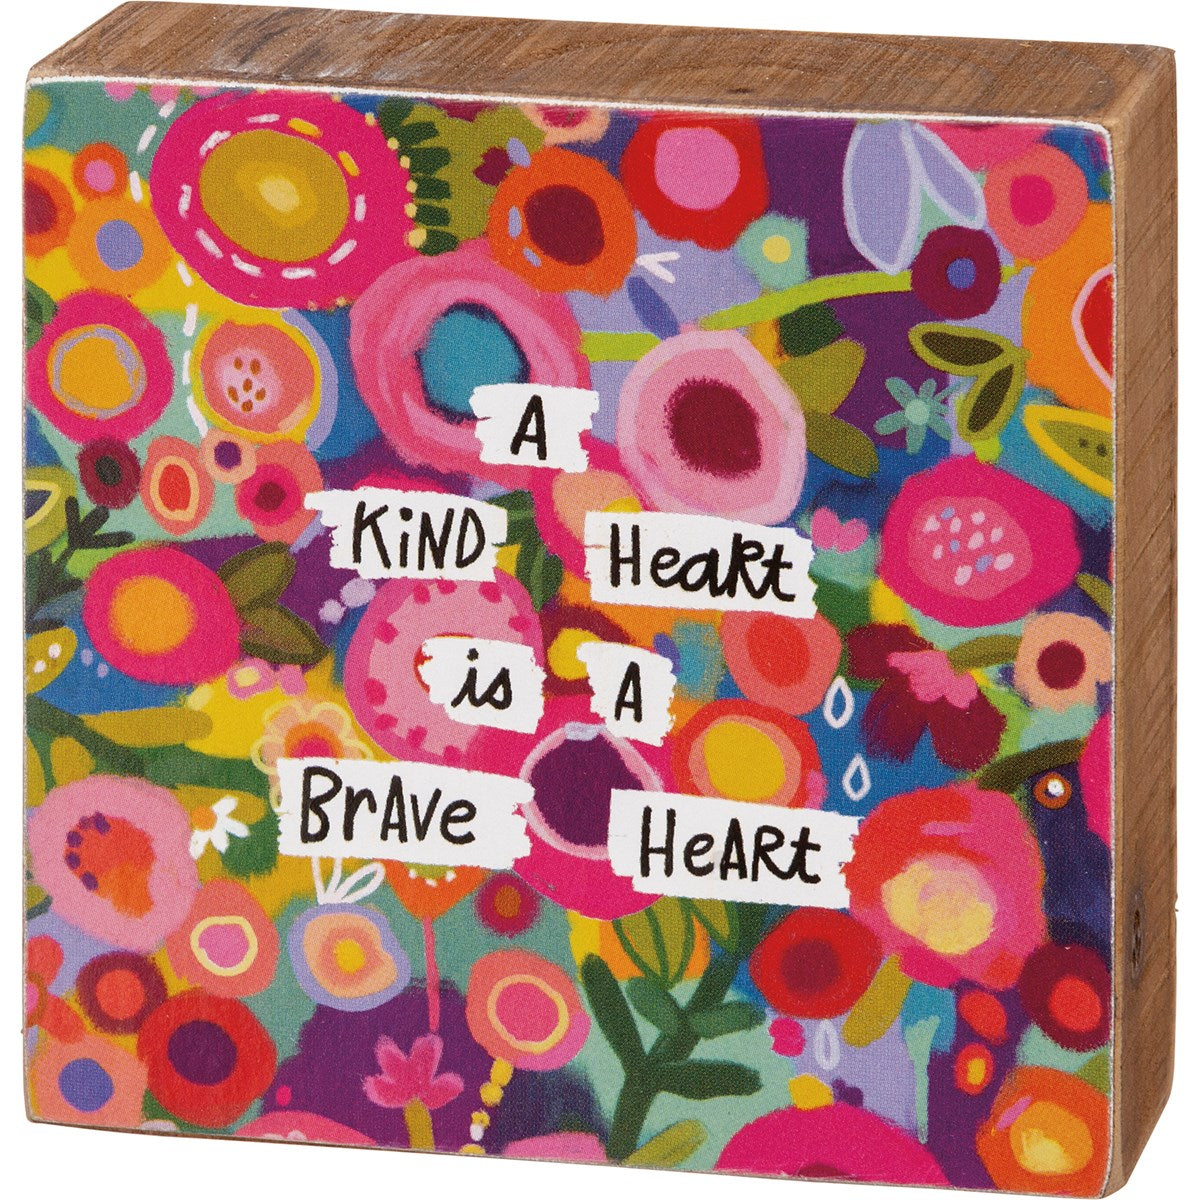 Block Sign - "A Kind Heart Is A Brave Heart"